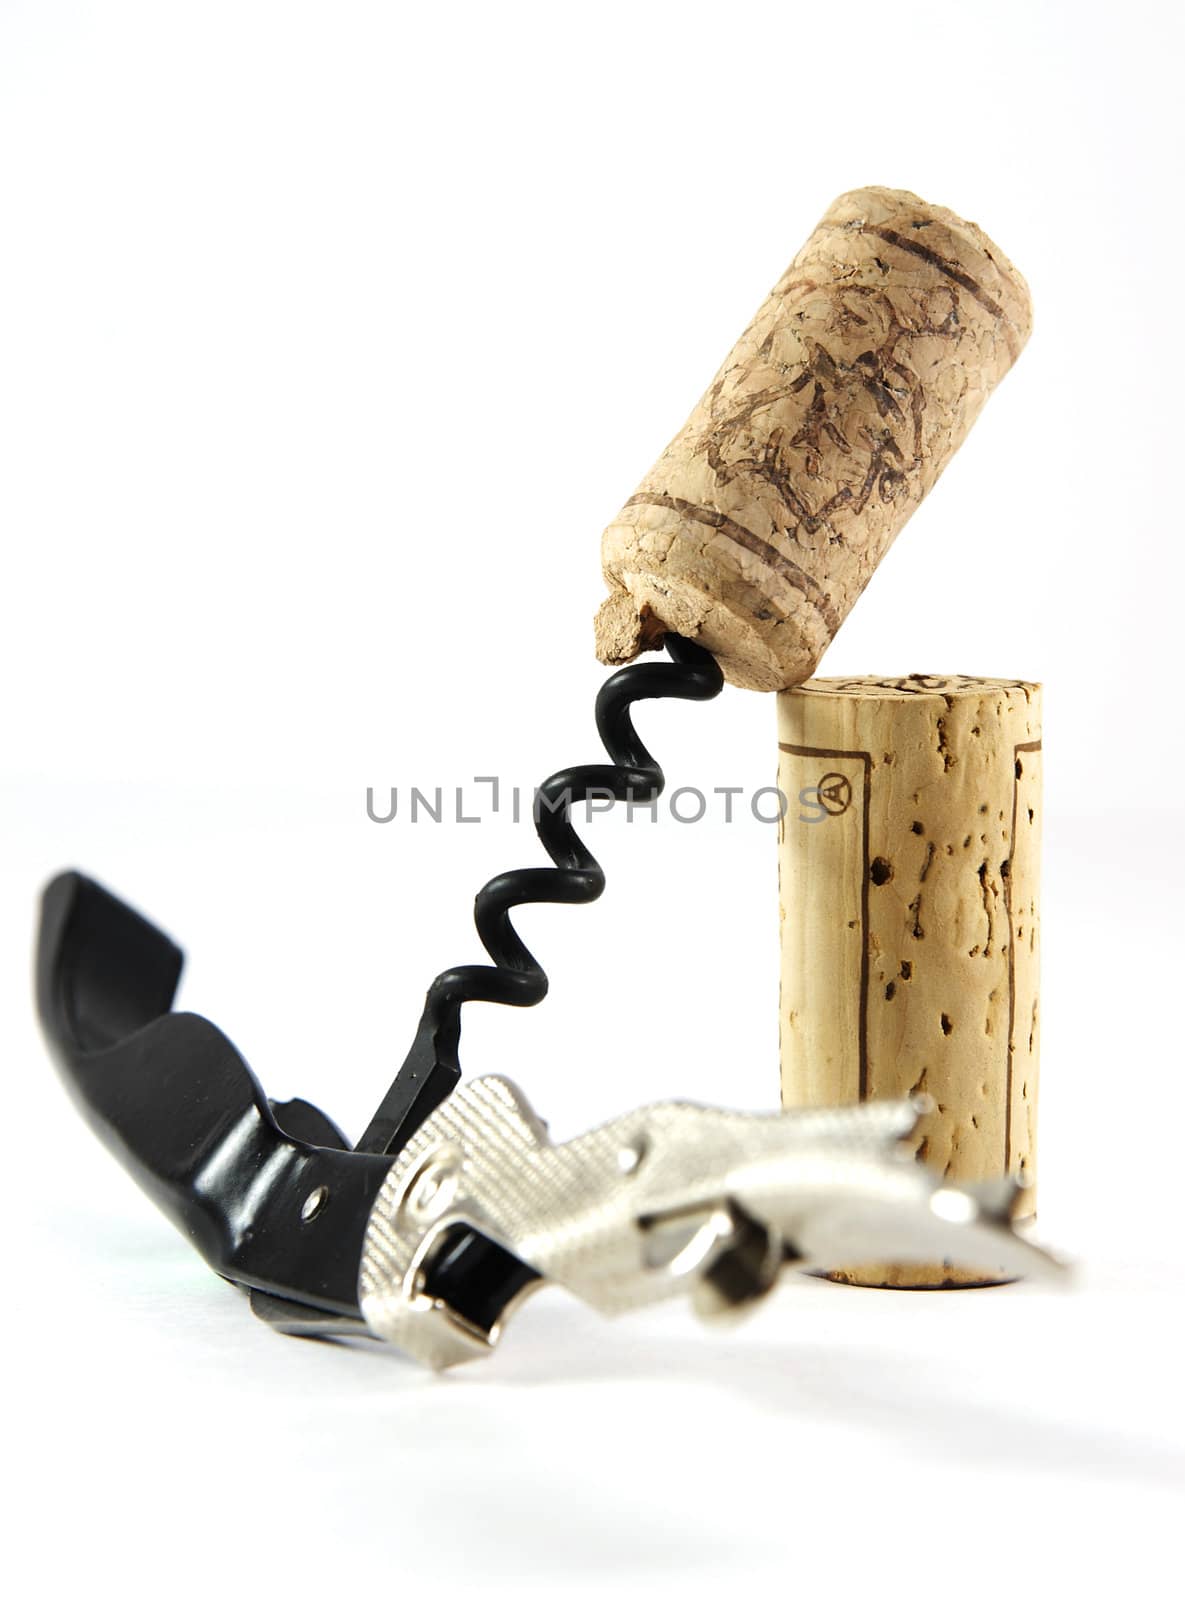 Corkscrew and two corks by serpl